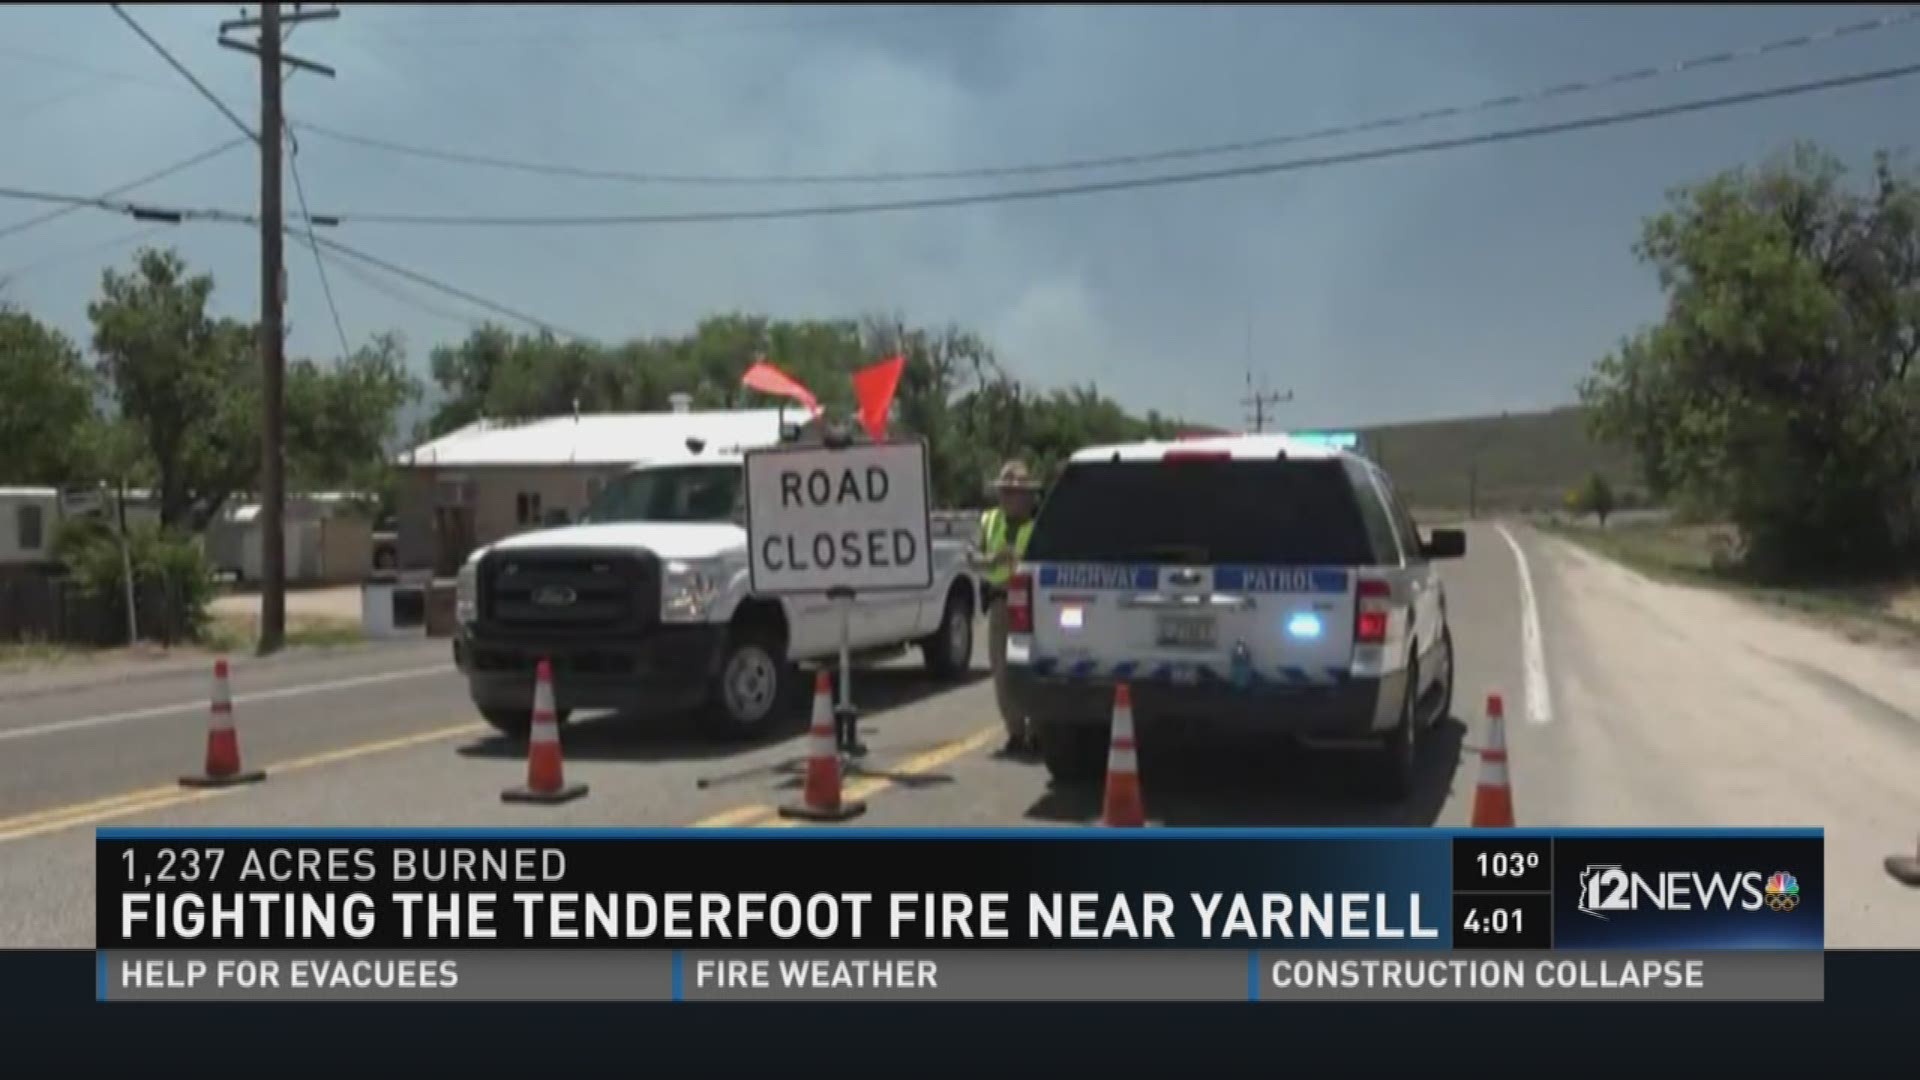 At least 250 people have been evacuated after a wildfire is burning near Yarnell